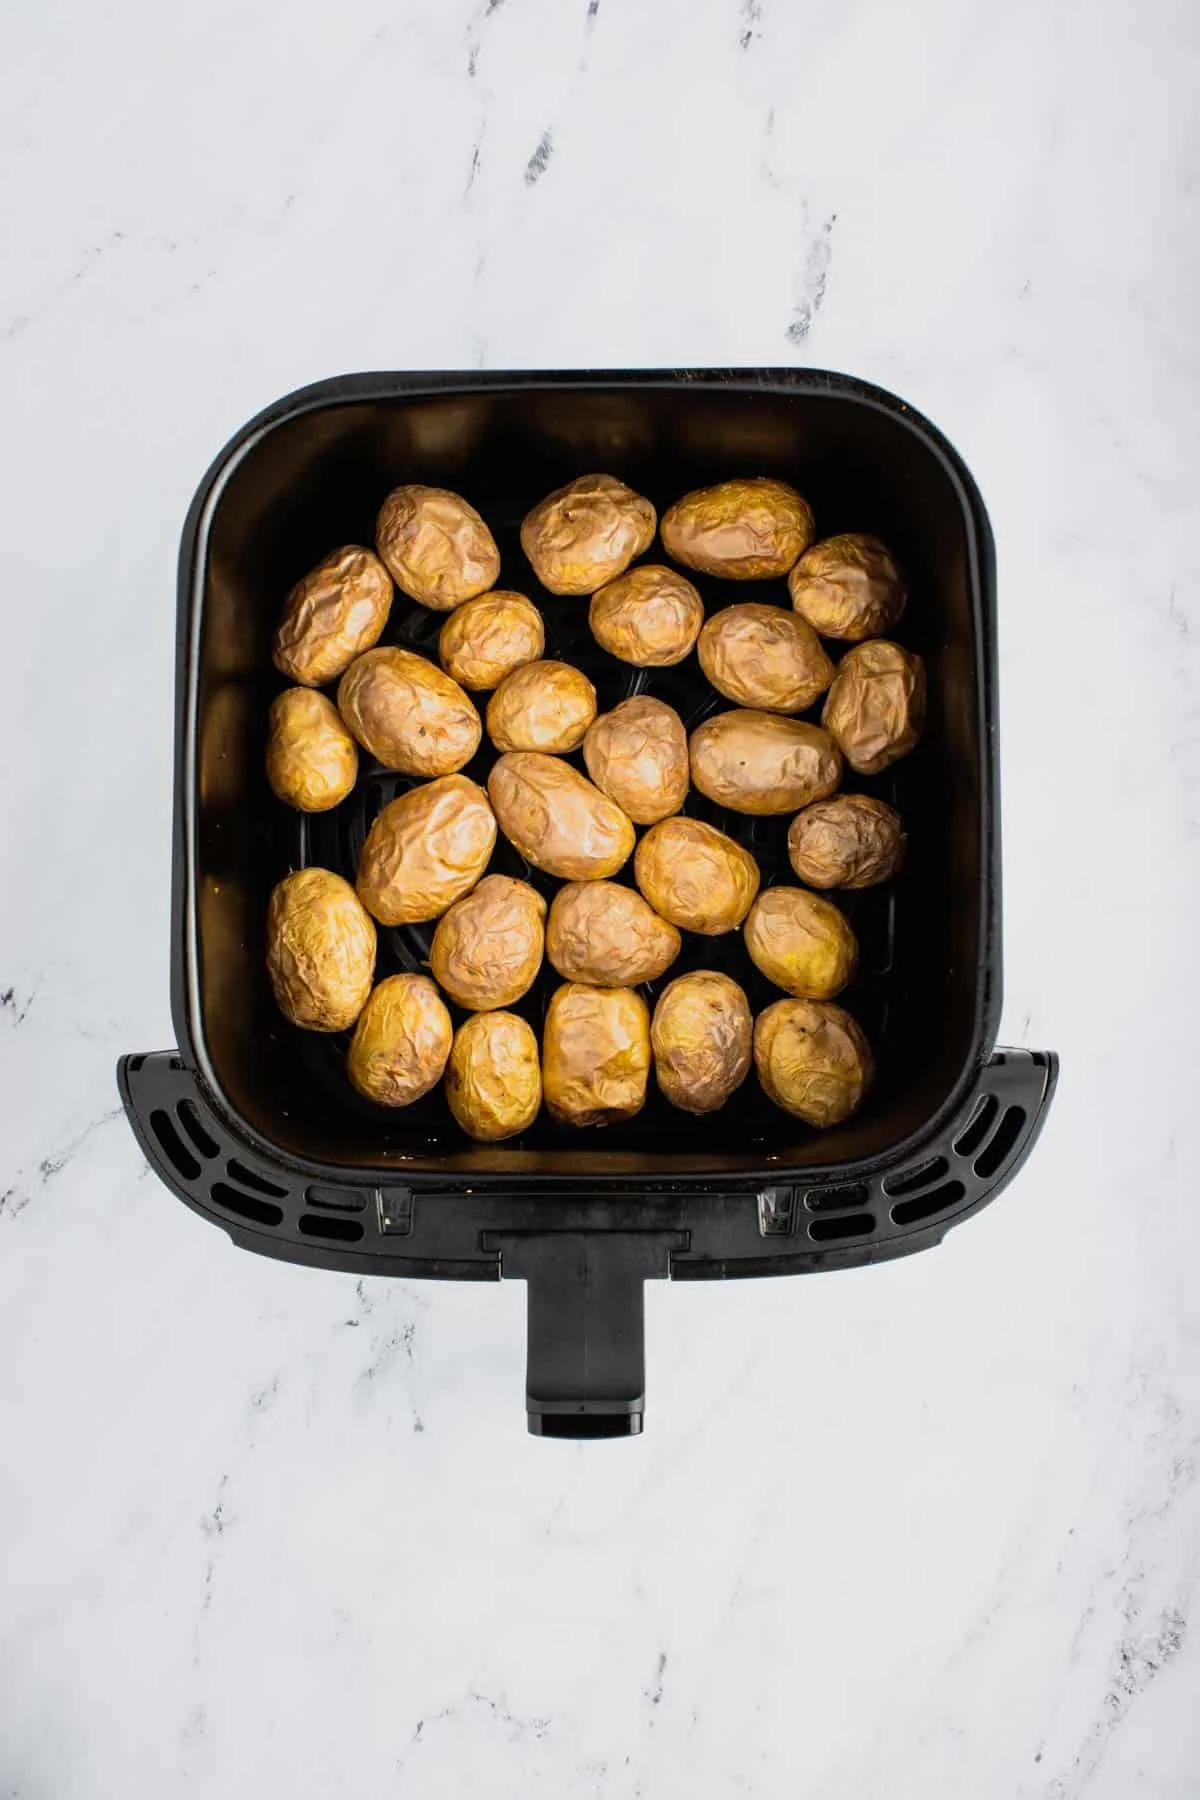 baby potatoes in an air fryer basket after cooking